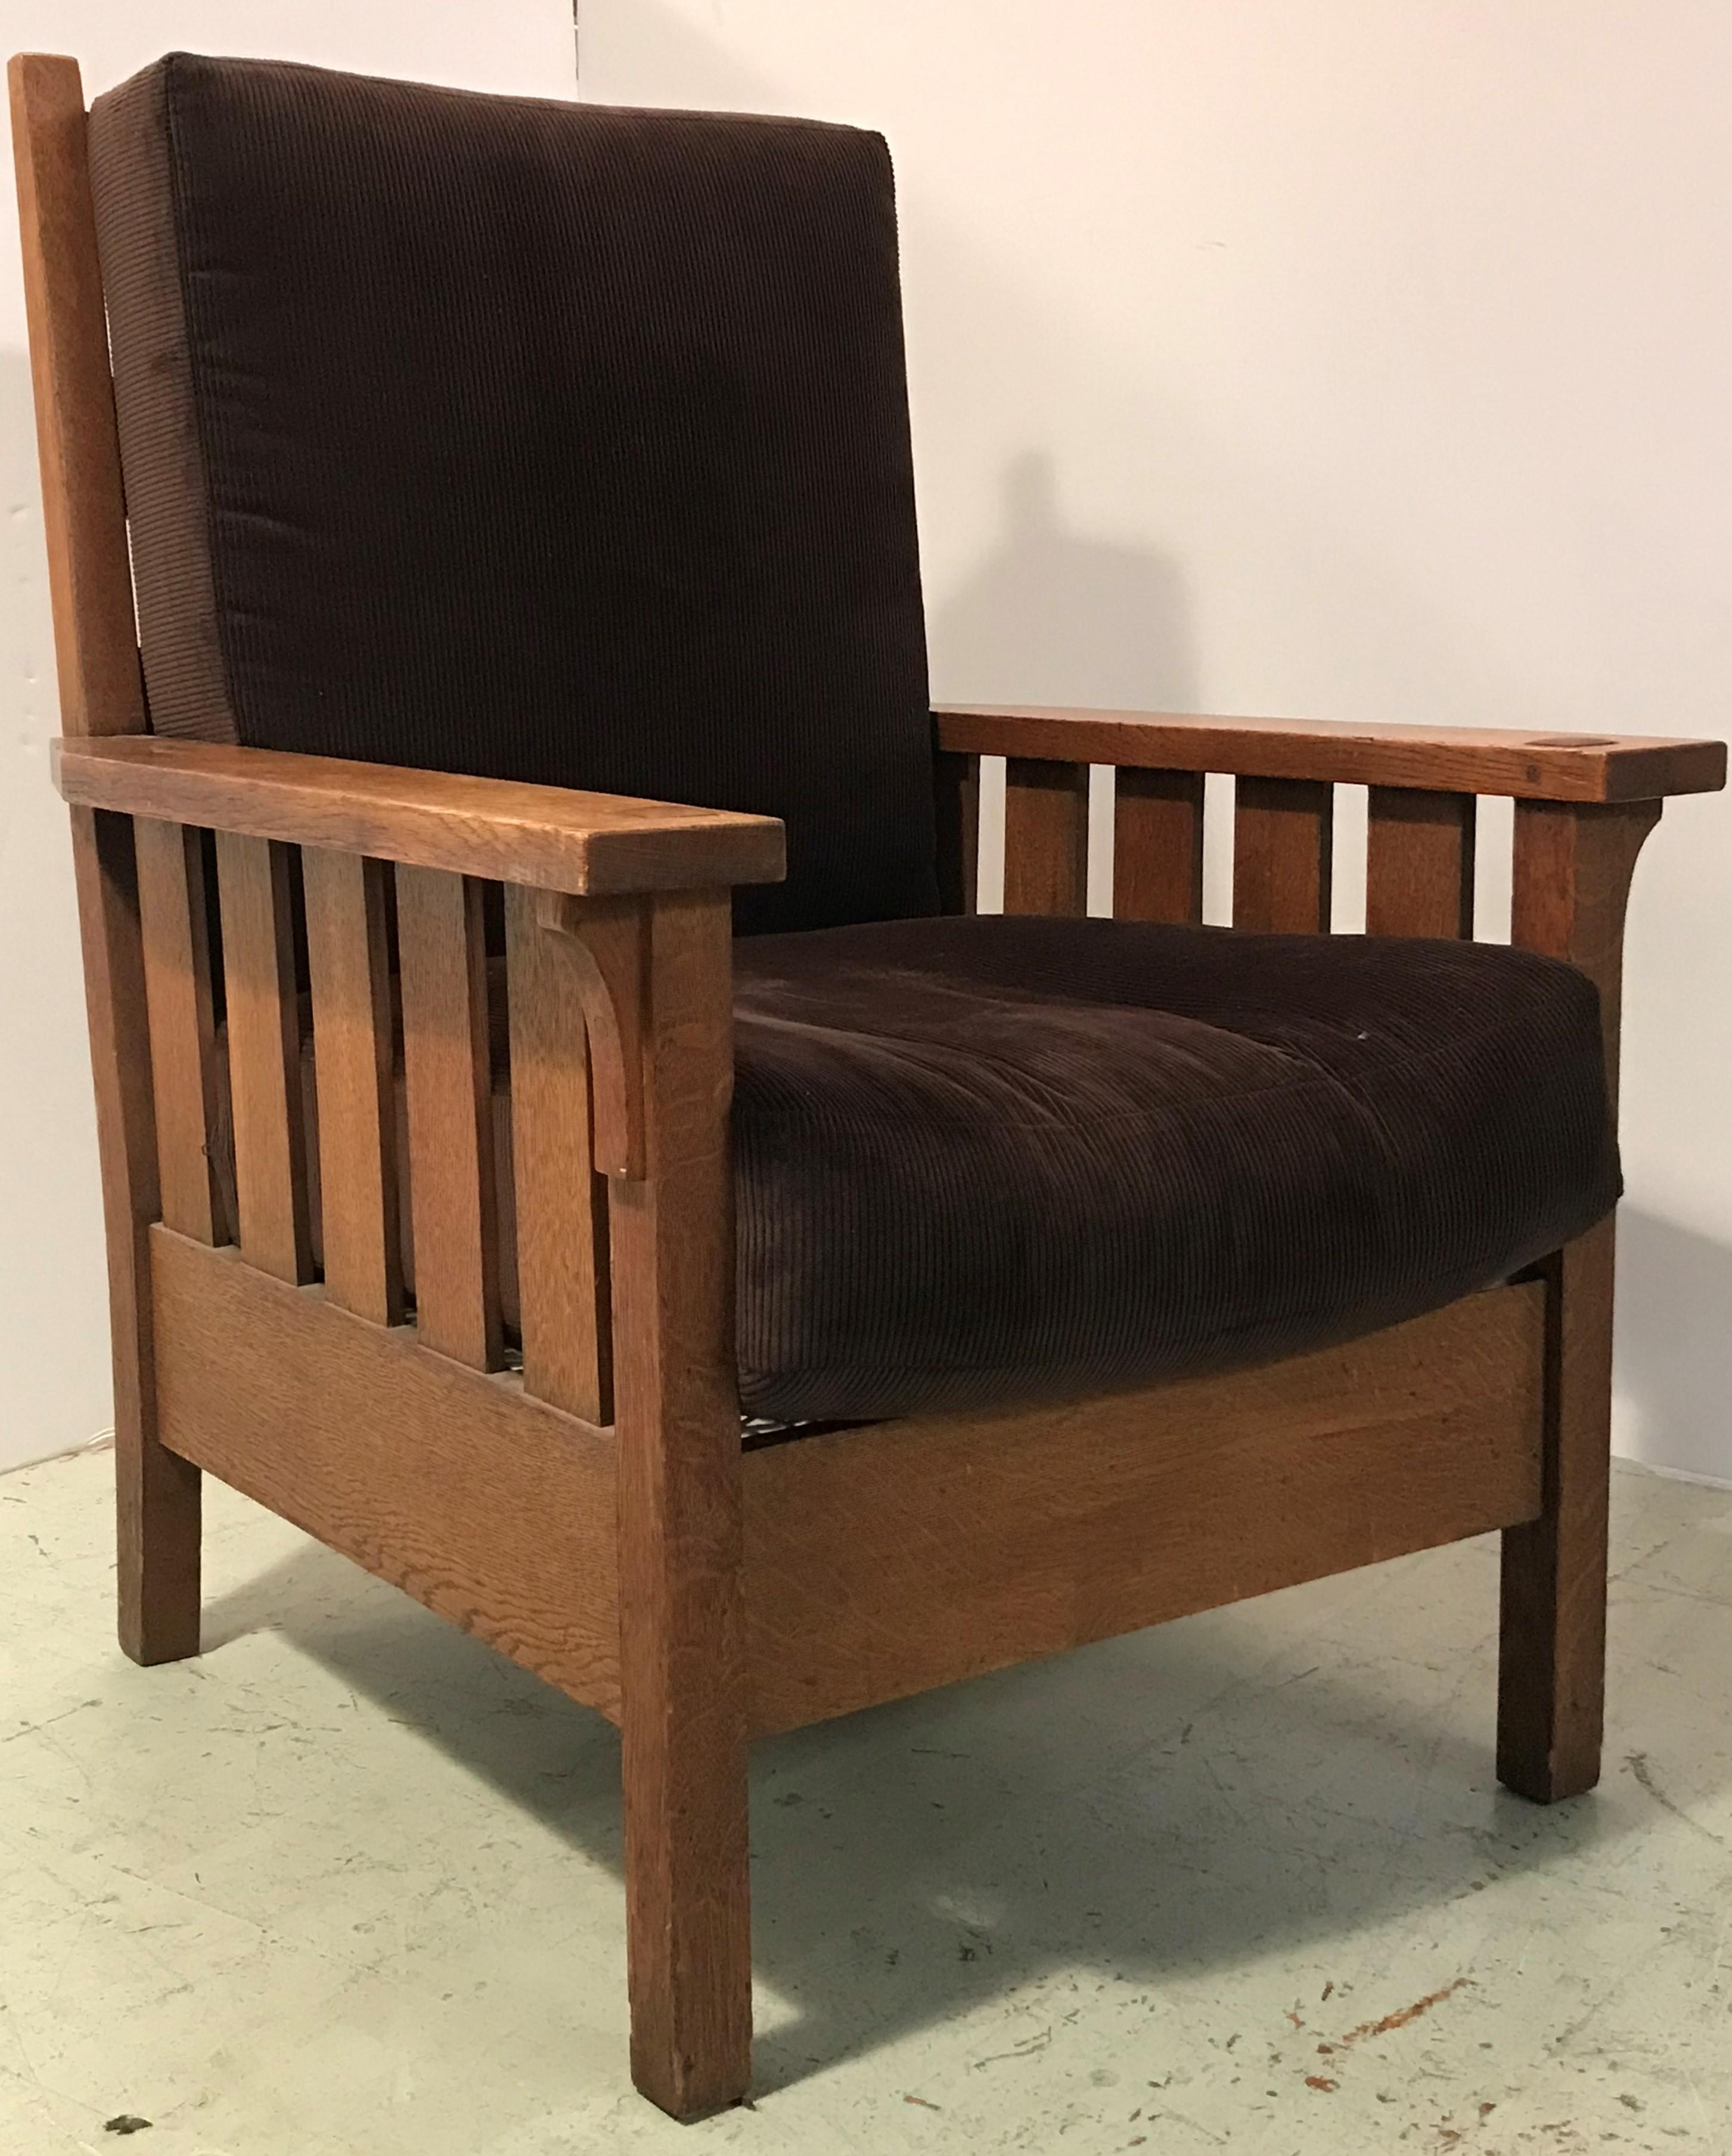 A 1910’s vintage Gustav Stickley Morris chair with original seat pad and restored back pad recovered in a dense soft pile brown corduroy and restored sturdy rope in lieu of caning which gives the seat a firmer feel with slightly more bounce and give